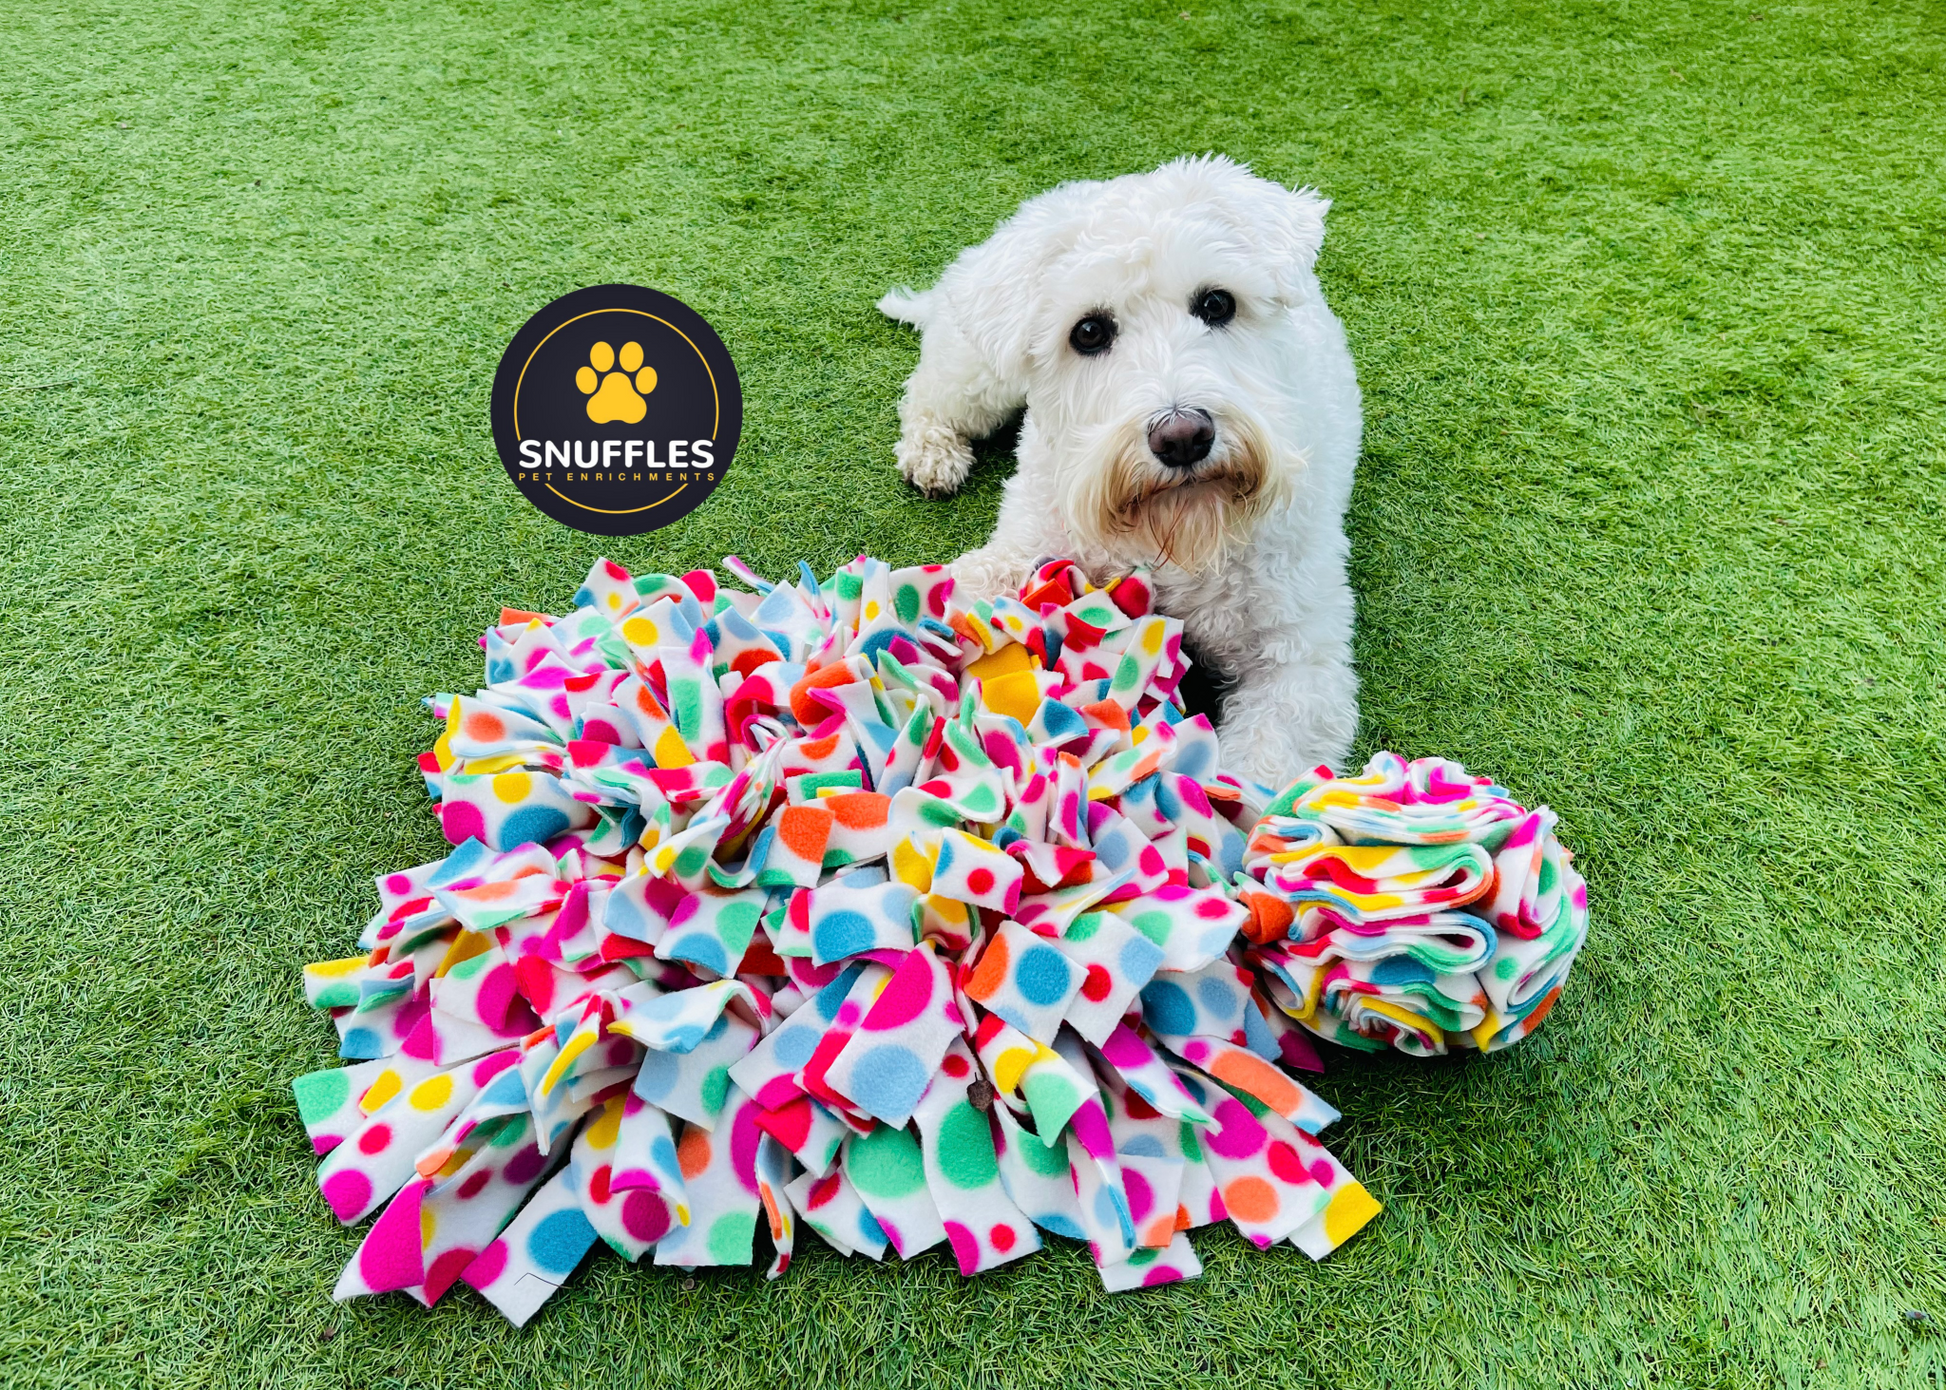 Medium Snuffle Mat And Medium Snuffle Ball Set For Dogs, Available In 10 Colour Options